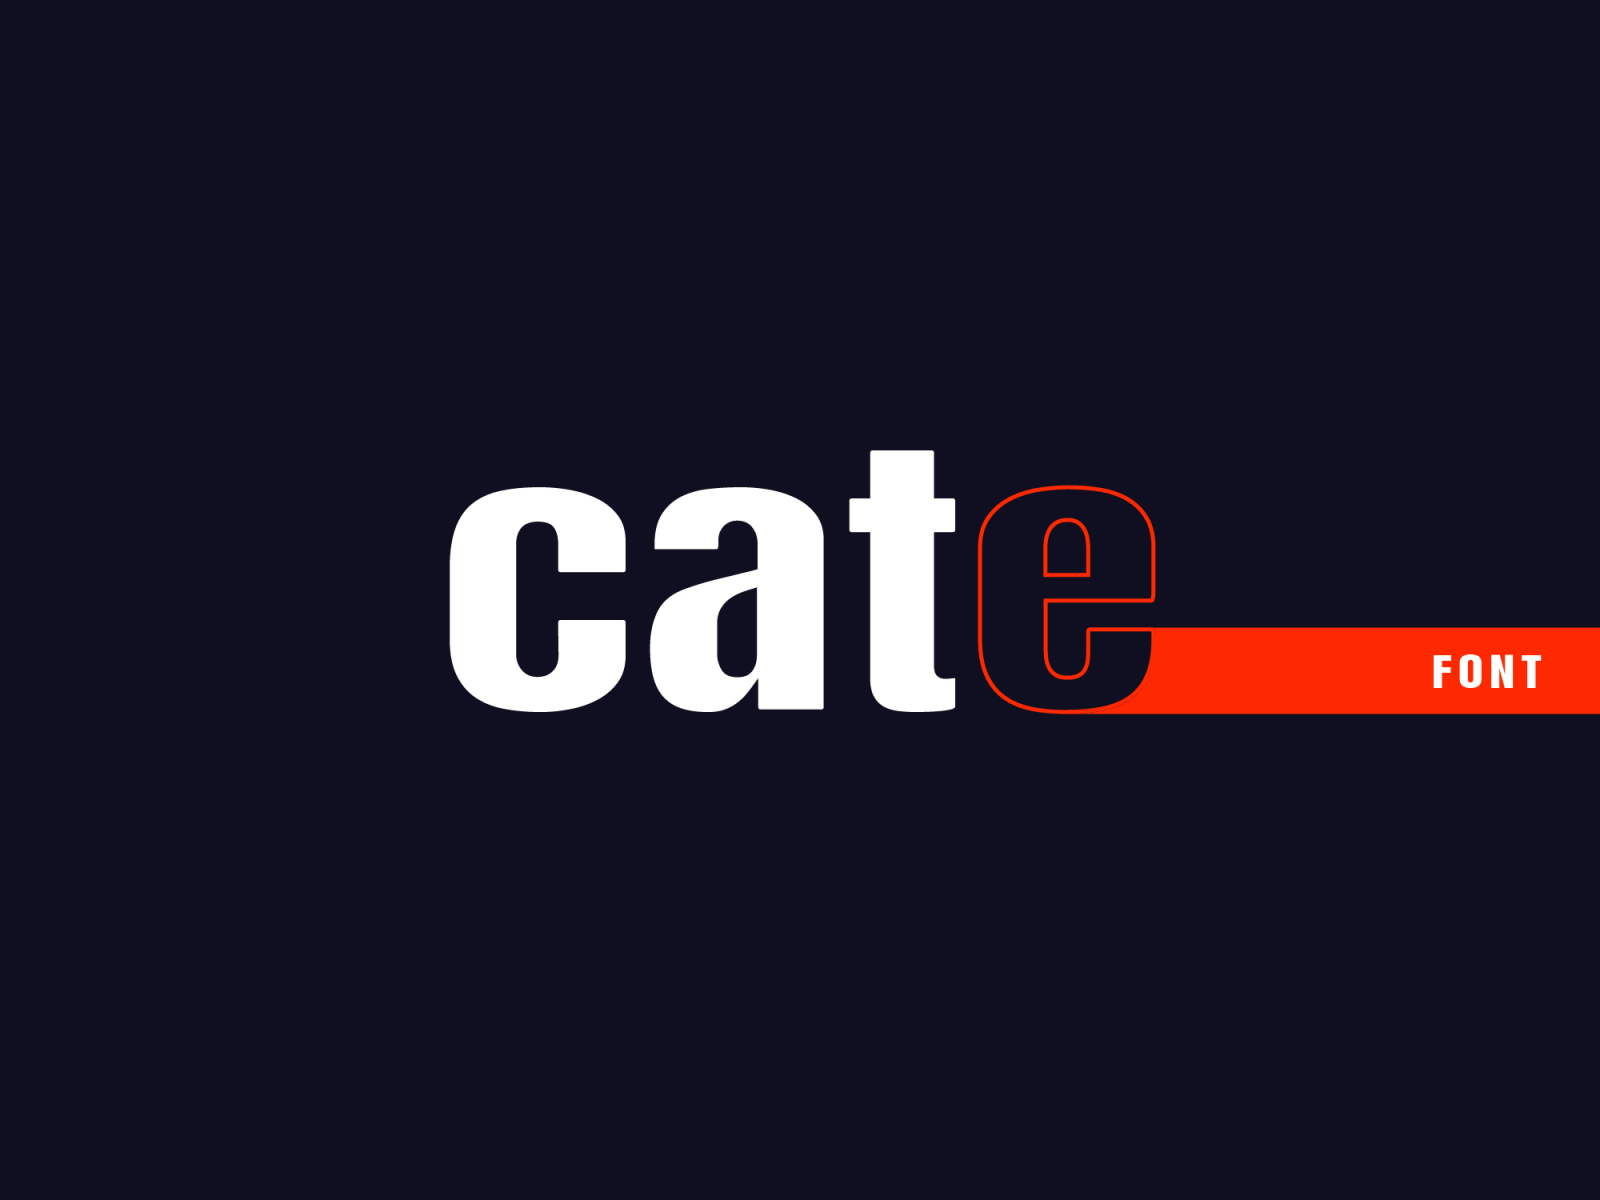 Cate Font by Design Stag on Dribbble